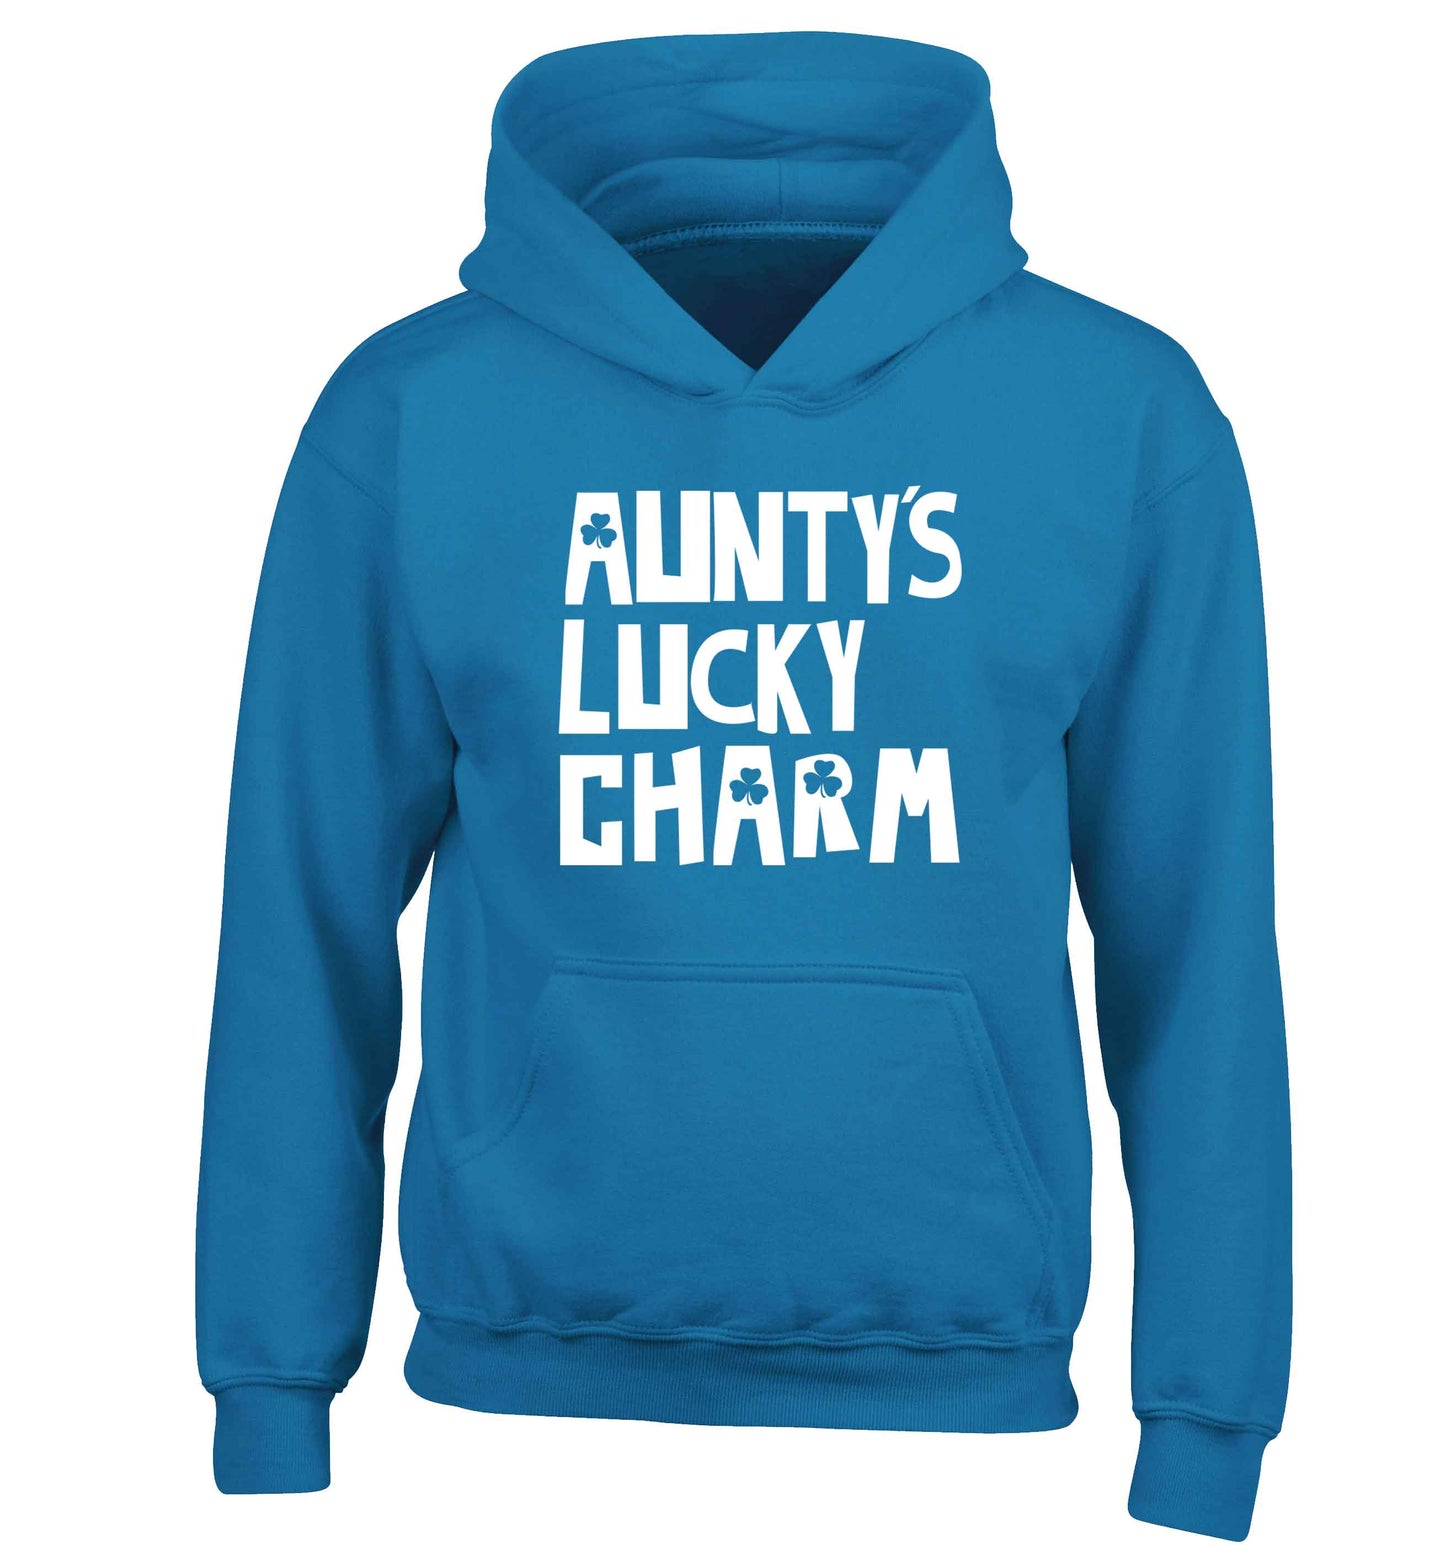 Aunty's lucky charm children's blue hoodie 12-13 Years